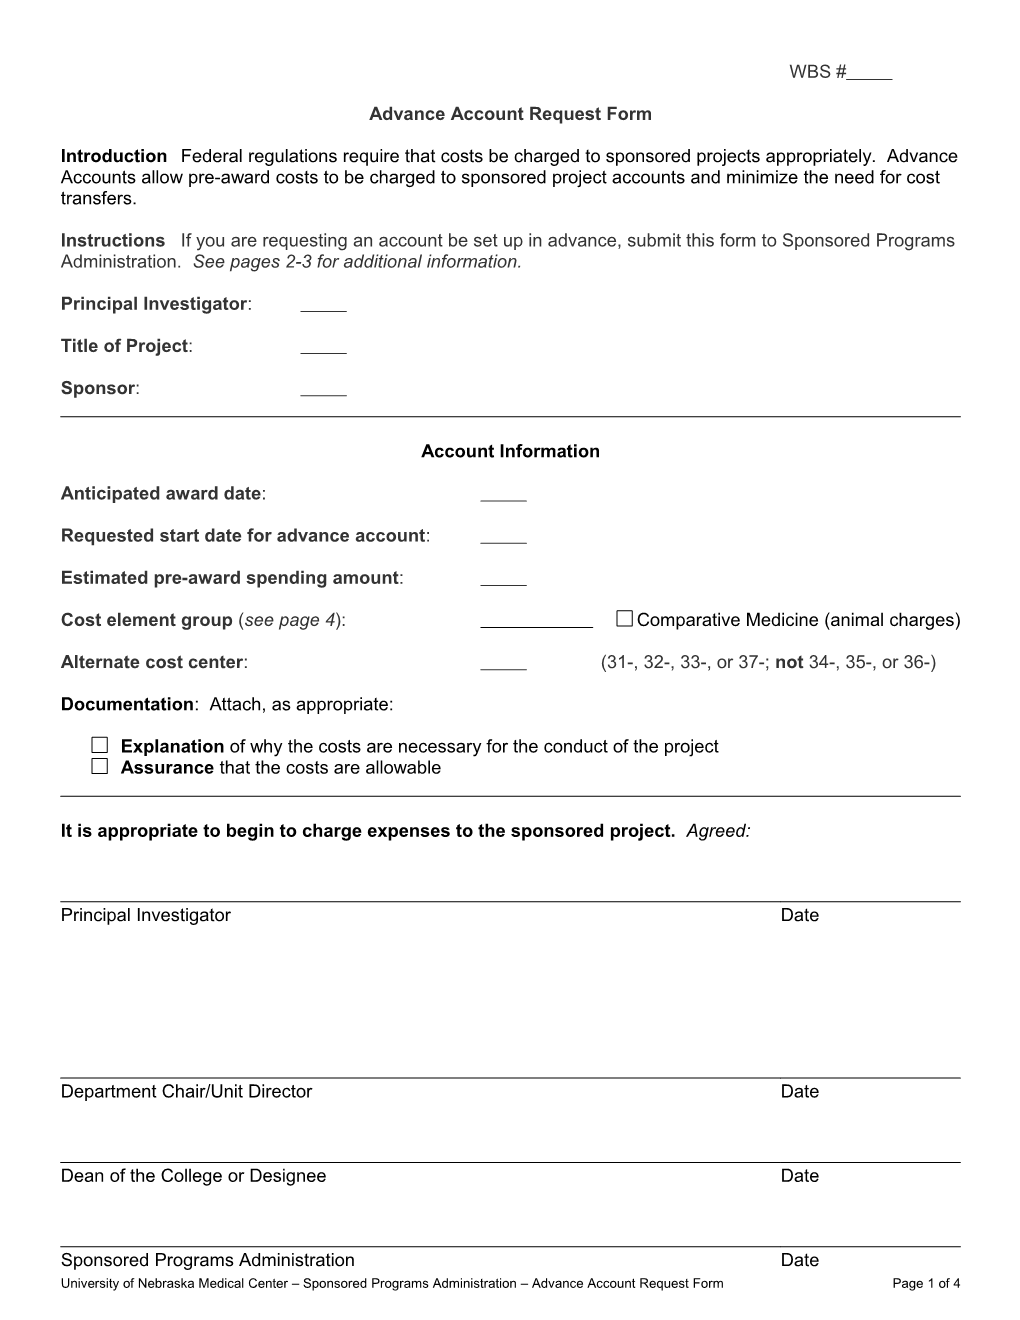 UNMC Request Form for Major Projects & Other Exceptions